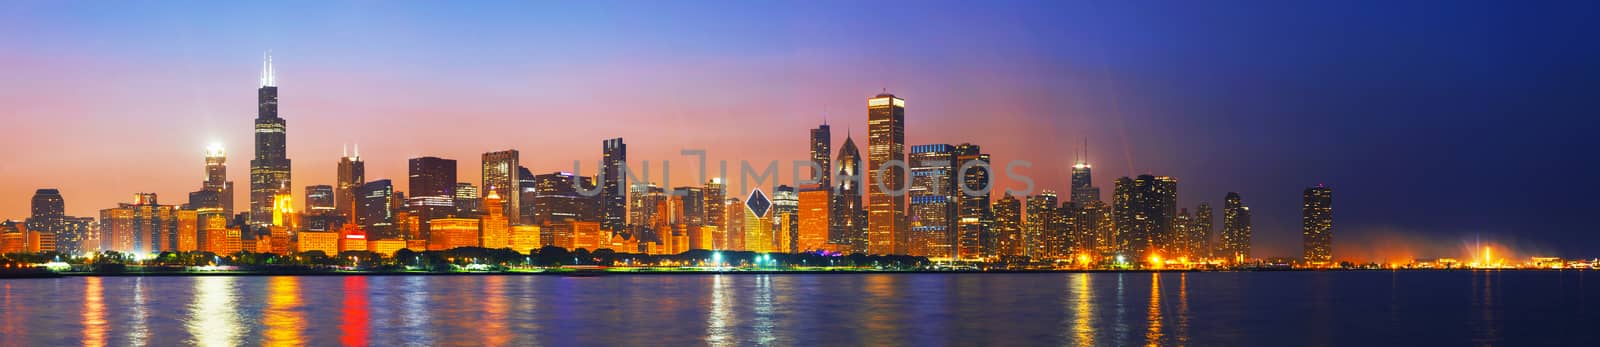 Downtown Chicago, IL at sunset by AndreyKr